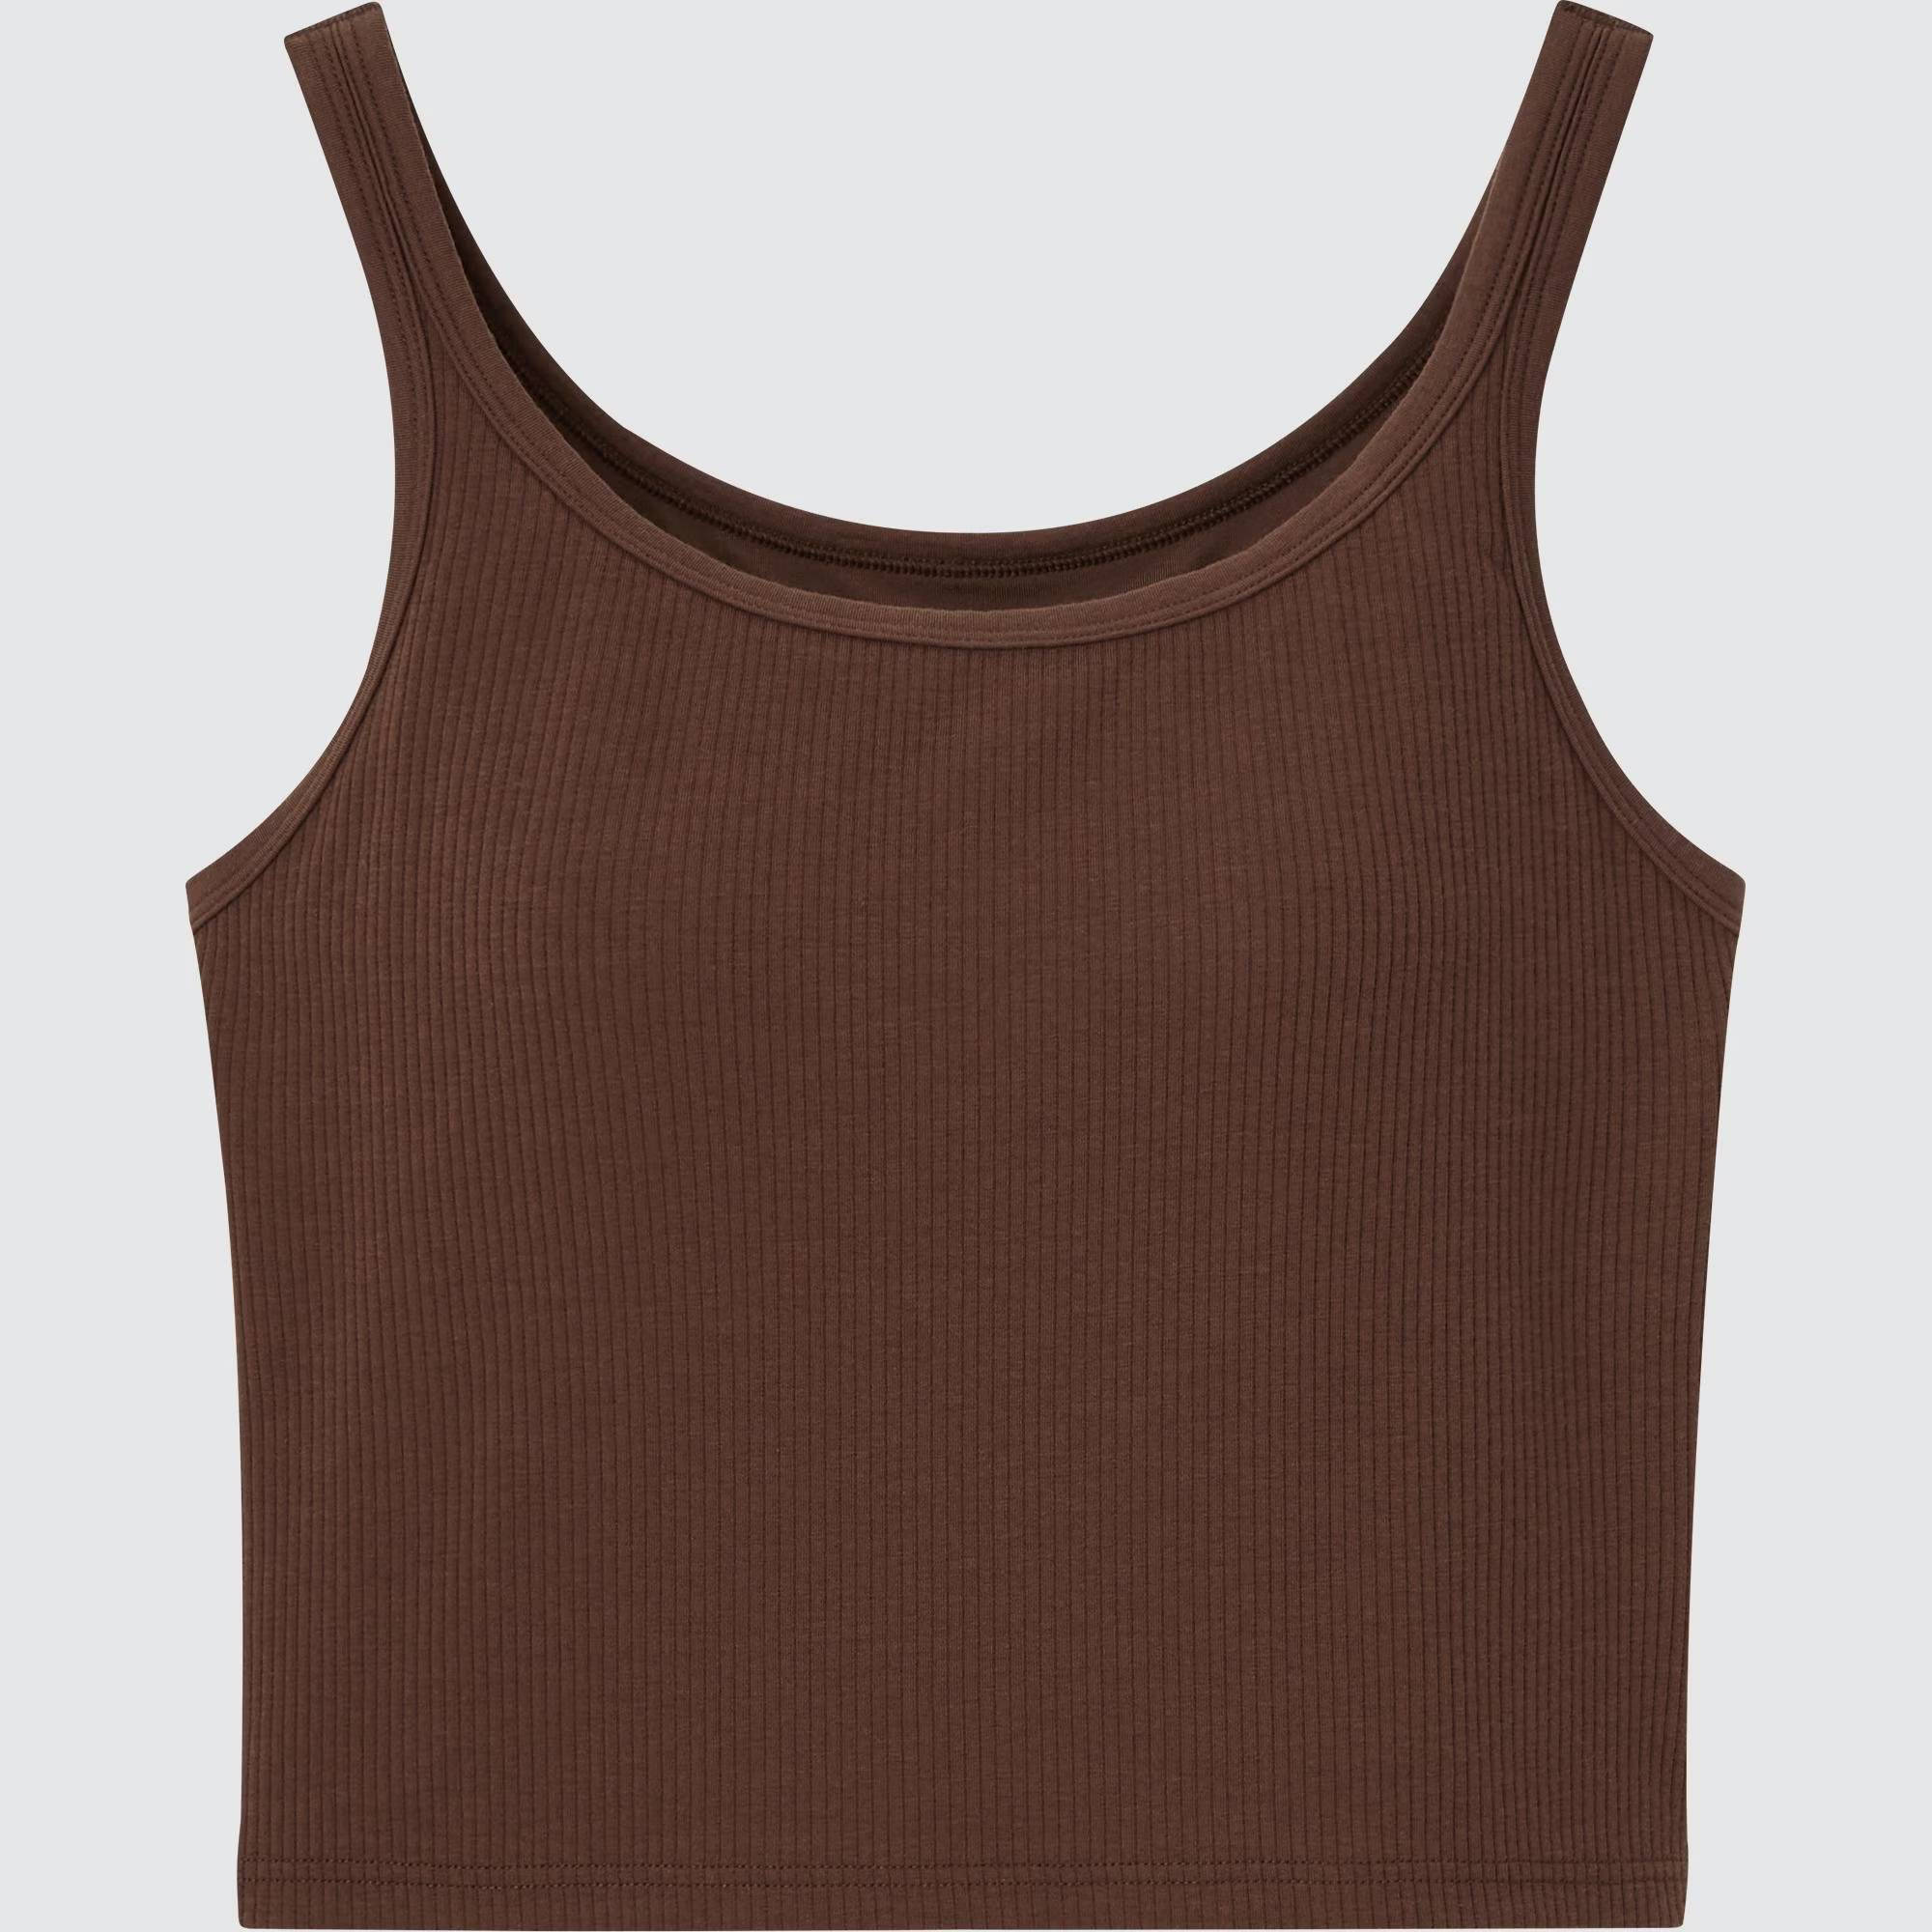 https://cms-cdn.thesolesupplier.co.uk/2023/03/uniqlo-airism-cotton-cropped-ribbed-bratop-brown-feature.jpg